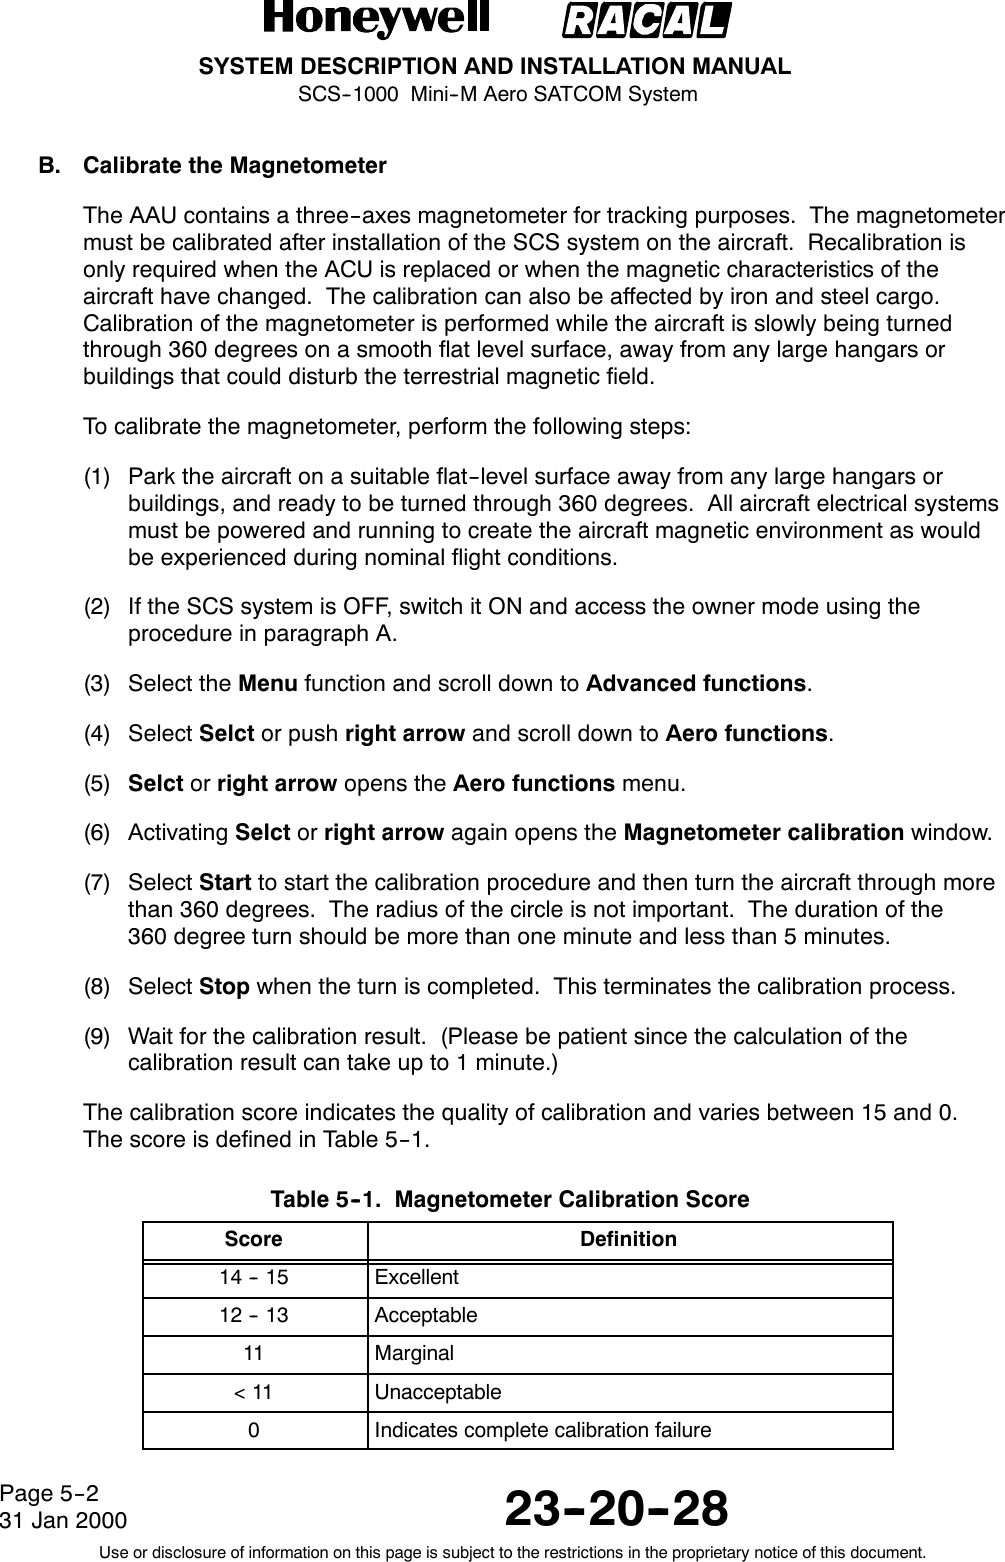 SYSTEM DESCRIPTION AND INSTALLATION MANUALSCS--1000 Mini--M Aero SATCOM System23--20--28Use or disclosure of information on this page is subject to the restrictions in the proprietary notice of this document.Page 5--231 Jan 2000B. Calibrate the MagnetometerThe AAU contains a three--axes magnetometer for tracking purposes. The magnetometermust be calibrated after installation of the SCS system on the aircraft. Recalibration isonly required when the ACU is replaced or when the magnetic characteristics of theaircraft have changed. The calibration can also be affected by iron and steel cargo.Calibration of the magnetometer is performed while the aircraft is slowly being turnedthrough 360 degrees on a smooth flat level surface, away from any large hangars orbuildings that could disturb the terrestrial magnetic field.To calibrate the magnetometer, perform the following steps:(1) Park the aircraft on a suitable flat--level surface away from any large hangars orbuildings, and ready to be turned through 360 degrees. All aircraft electrical systemsmust be powered and running to create the aircraft magnetic environment as wouldbe experienced during nominal flight conditions.(2) If the SCS system is OFF, switch it ON and access the owner mode using theprocedure in paragraph A.(3) Select the Menu function and scroll down to Advanced functions.(4) Select Selct or push right arrow and scroll down to Aero functions.(5) Selct or right arrow opens the Aero functions menu.(6) Activating Selct or right arrow again opens the Magnetometer calibration window.(7) Select Start to start the calibration procedure and then turn the aircraft through morethan 360 degrees. The radius of the circle is not important. The duration of the360 degree turn should be more than one minute and less than 5 minutes.(8) Select Stop when the turn is completed. This terminates the calibration process.(9) Wait for the calibration result. (Please be patient since the calculation of thecalibrationresultcantakeupto1minute.)The calibration score indicates the quality of calibration and varies between 15 and 0.The score is defined in Table 5--1.Table 5--1. Magnetometer Calibration ScoreScore Definition14 -- 15 Excellent12 -- 13 Acceptable11 Marginal&lt;11 Unacceptable0Indicates complete calibration failure